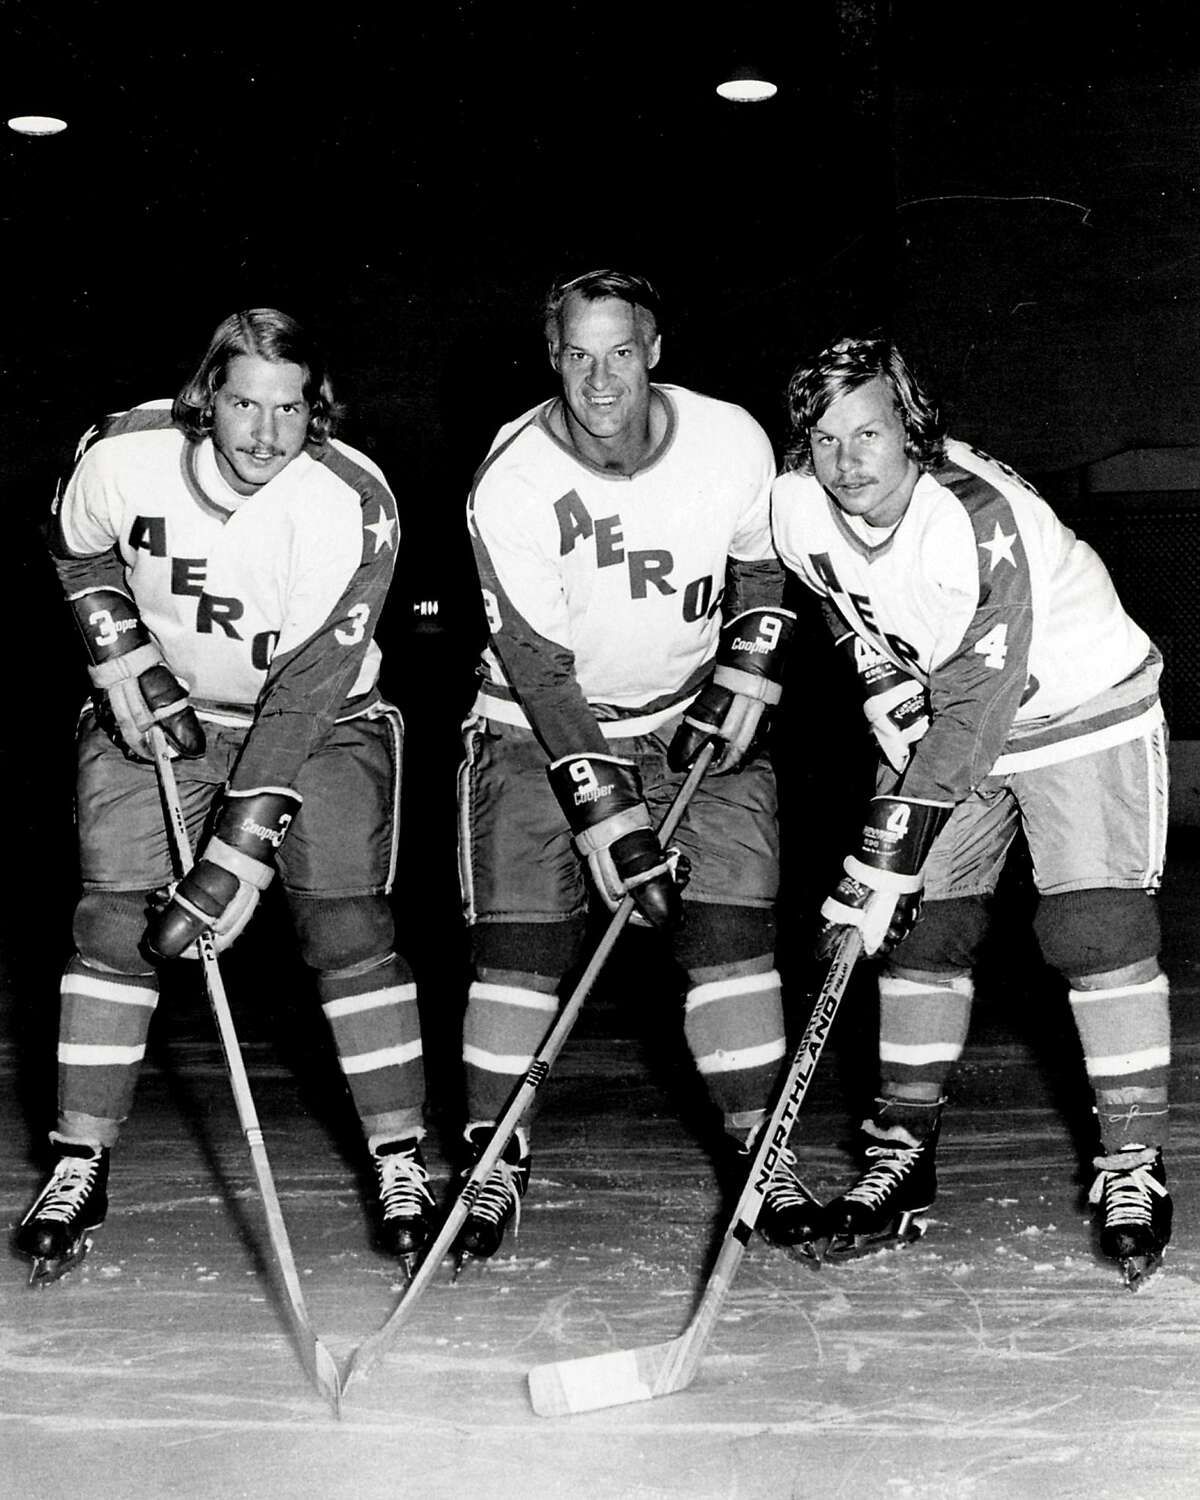 In an Aug. 3, 1973 file photo, former Detroit Red Wings great Gordie Howe, center, is flanked by sons Marty, left, and Mark as they try their new Houston Aeros uniforms in St. Clair Shores, Mich. A made-for-TV movie, "Mr. Hockey: The Gordie Howe Story," focuses on the season the Hall of Famer teamed up with his sons in Houston. The U.S. premiere of the film is Saturday, May 4, 2013. (AP Photo/The Macomb Daily, David Posavetz, FILE)